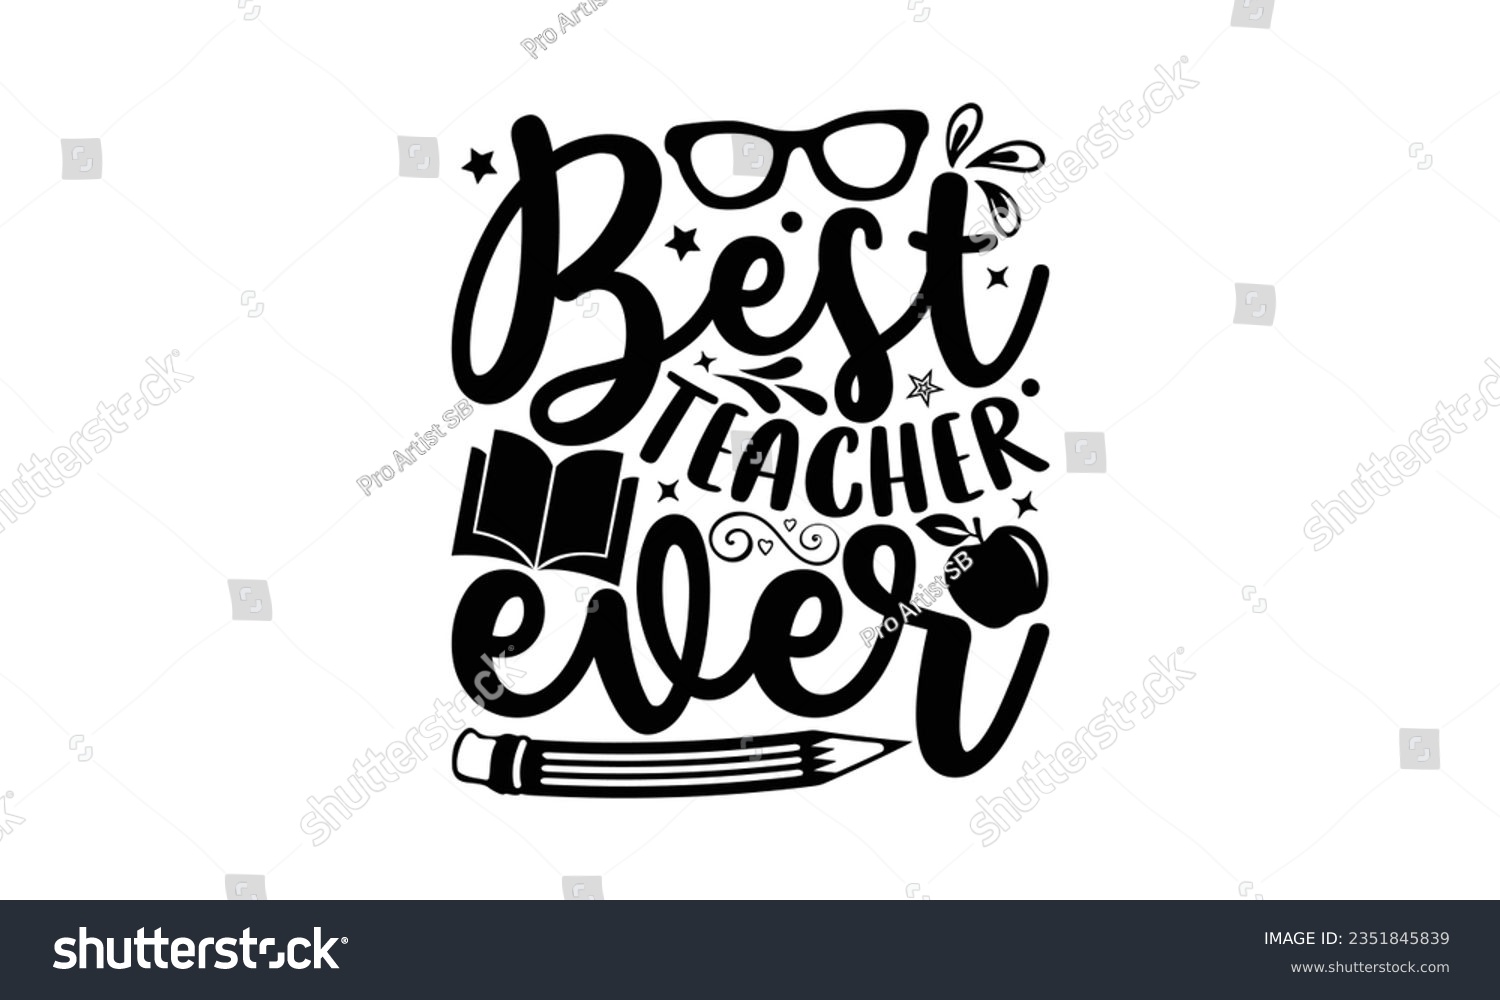 SVG of Best teacher ever - School SVG Design Sublimation, Back To School Quotes, Calligraphy Graphic Design, Typography Poster with Old Style Camera and Quote. svg